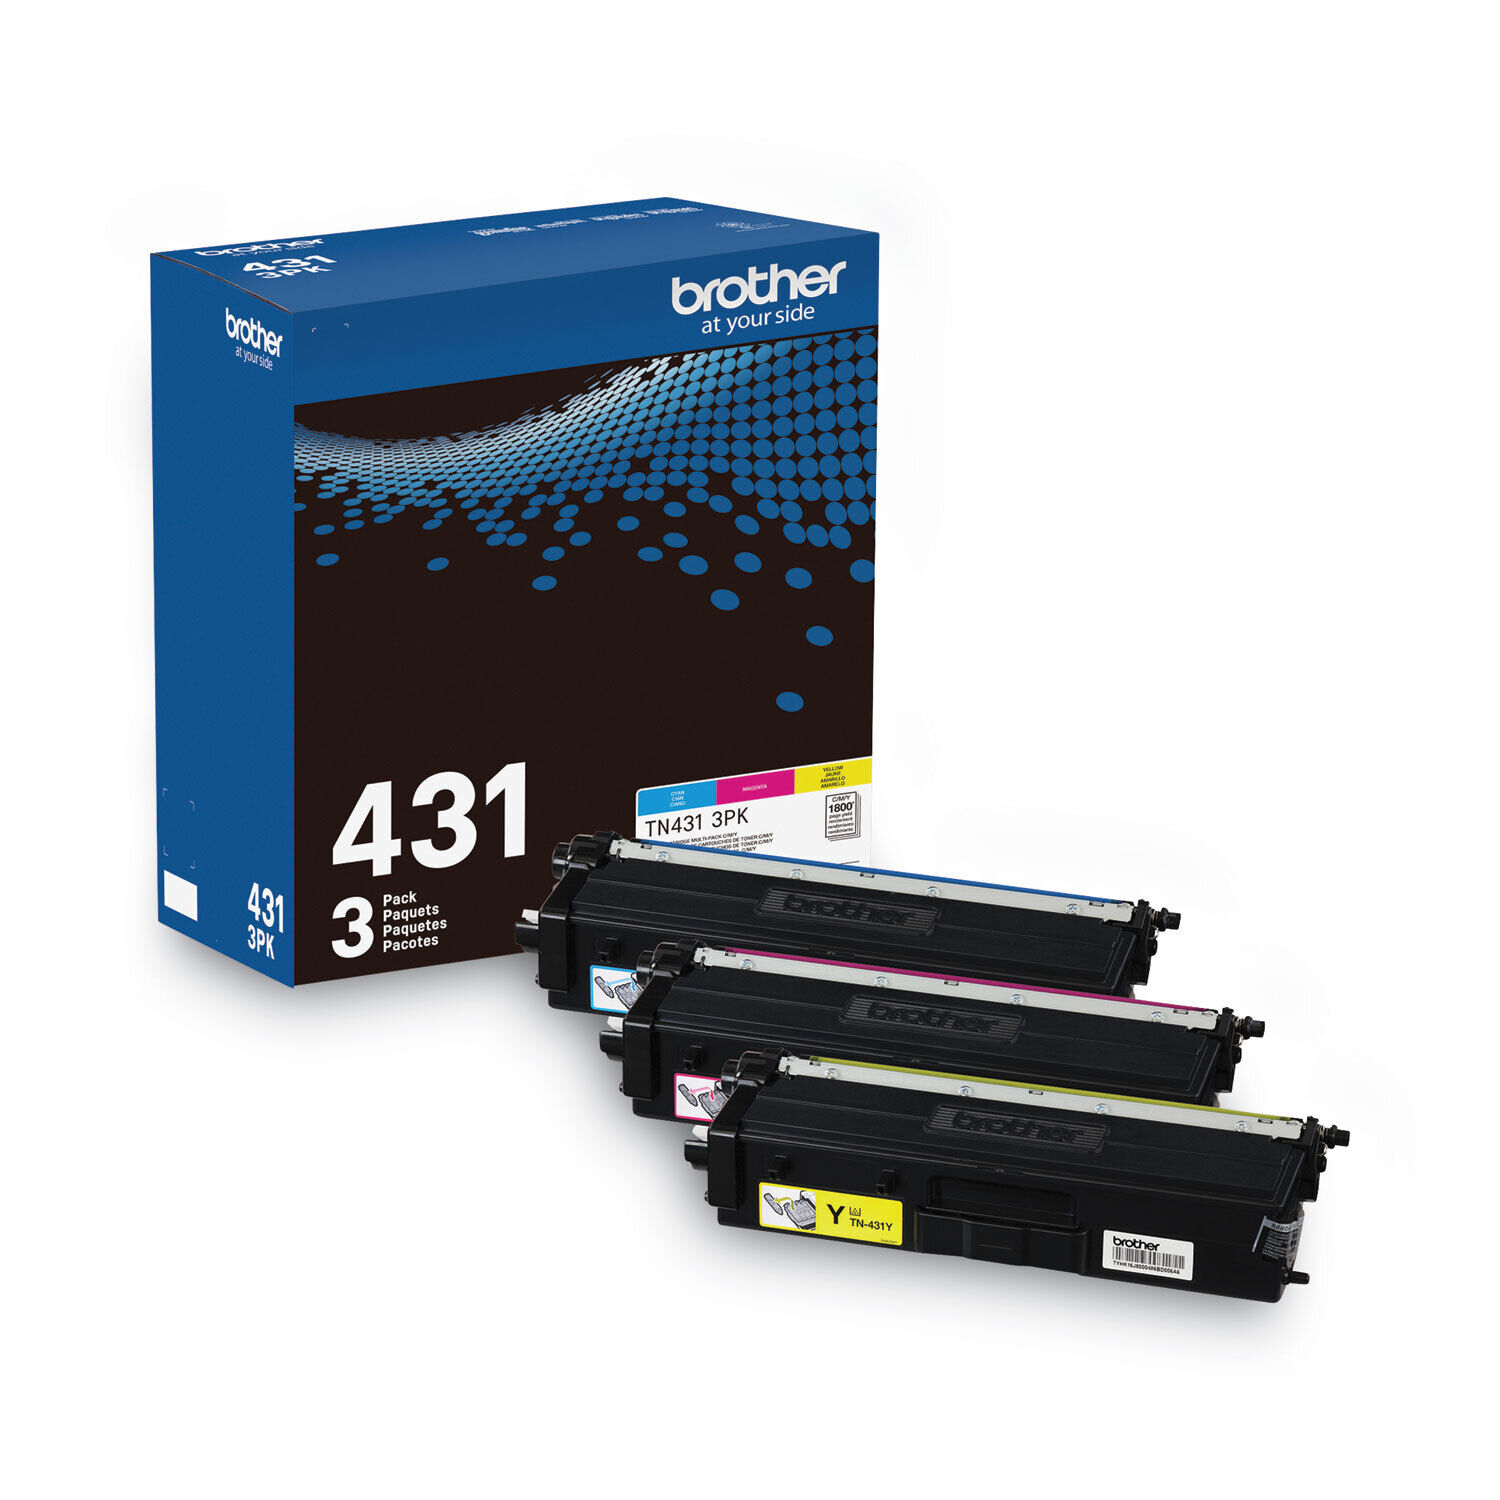 Brother 3 Pack Multi Pack TN4313PK Color Toners